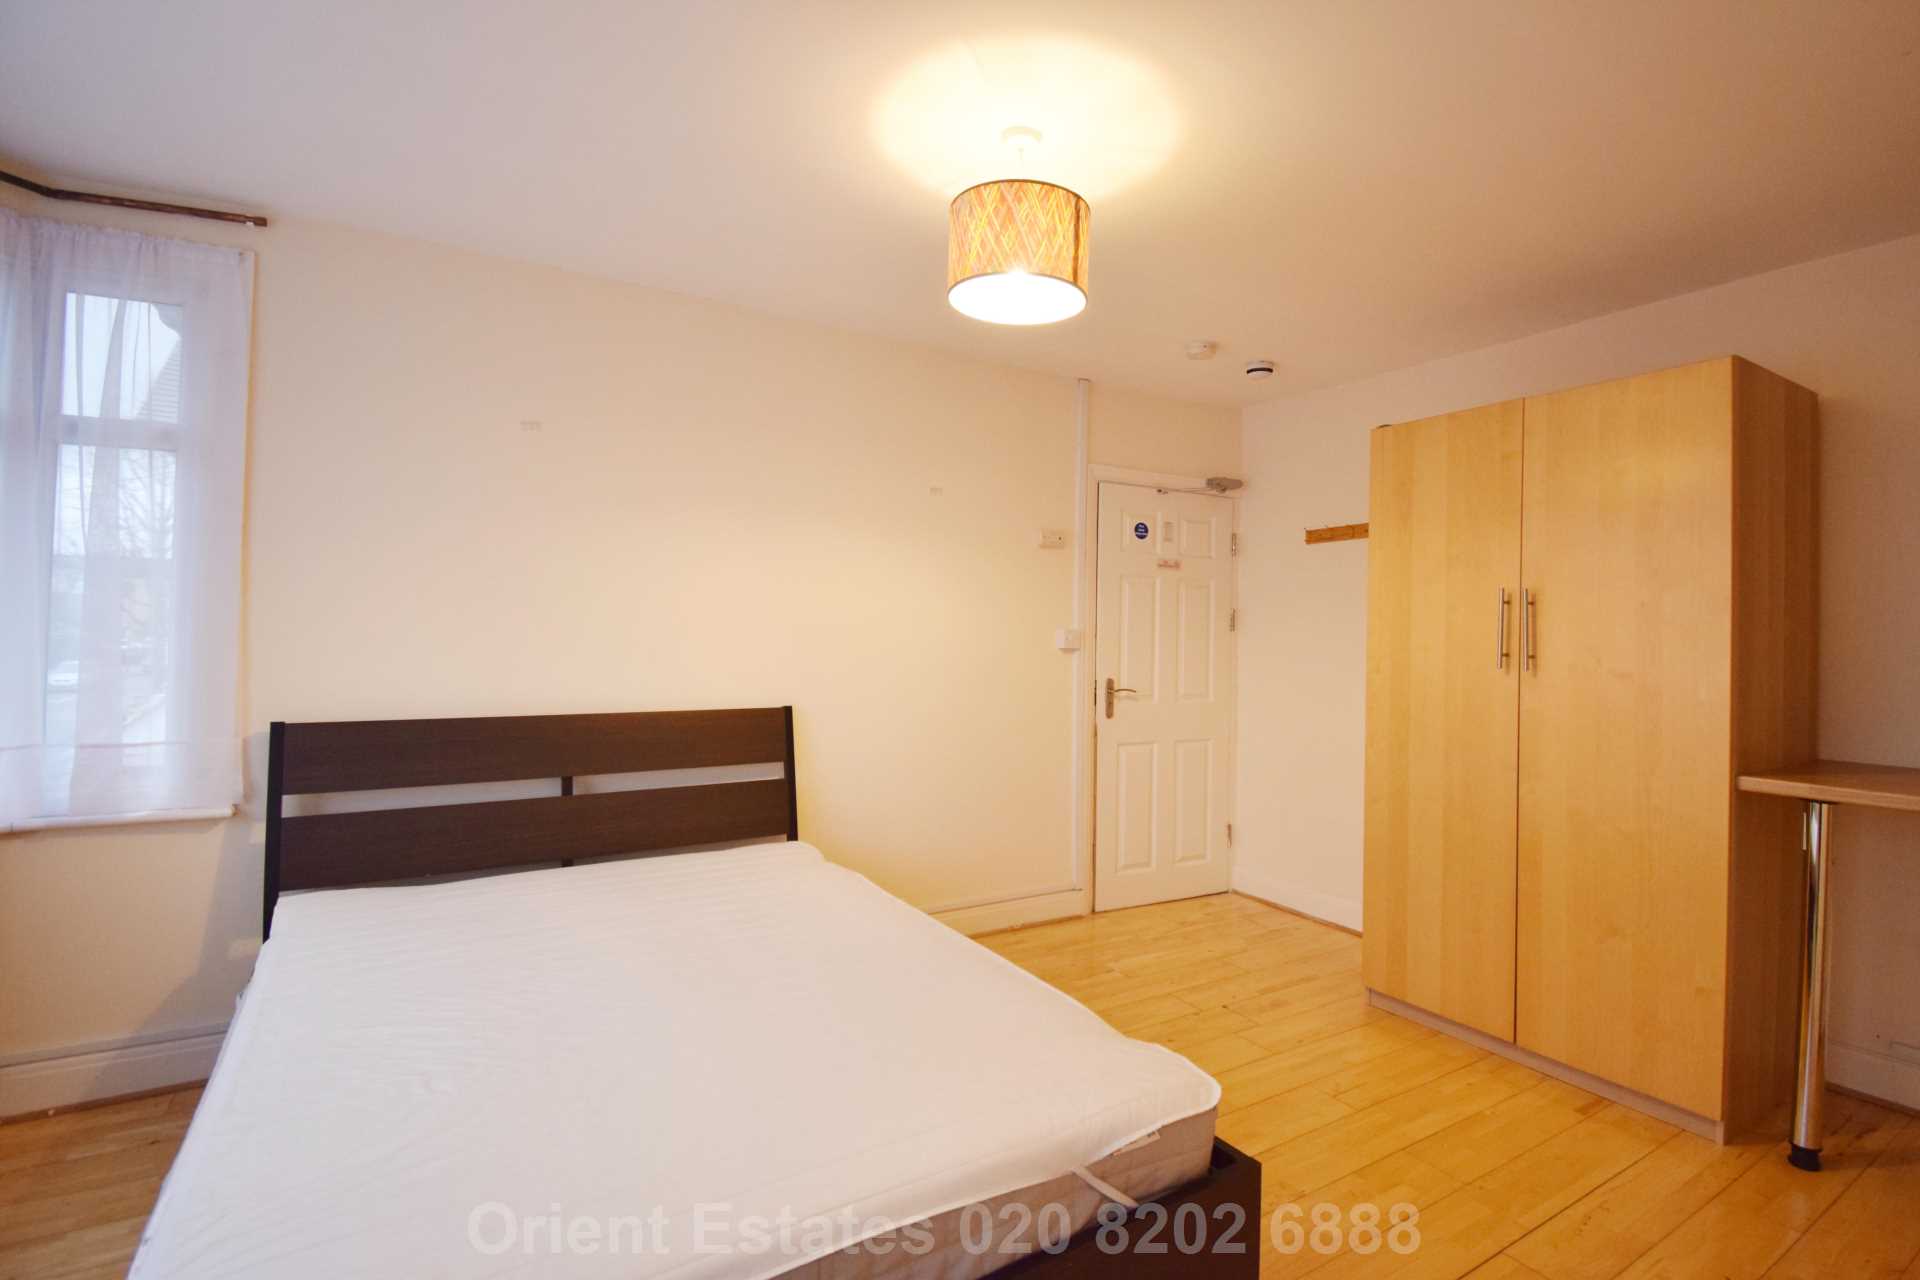 1 bed Room for rent in London. From Orient Estates